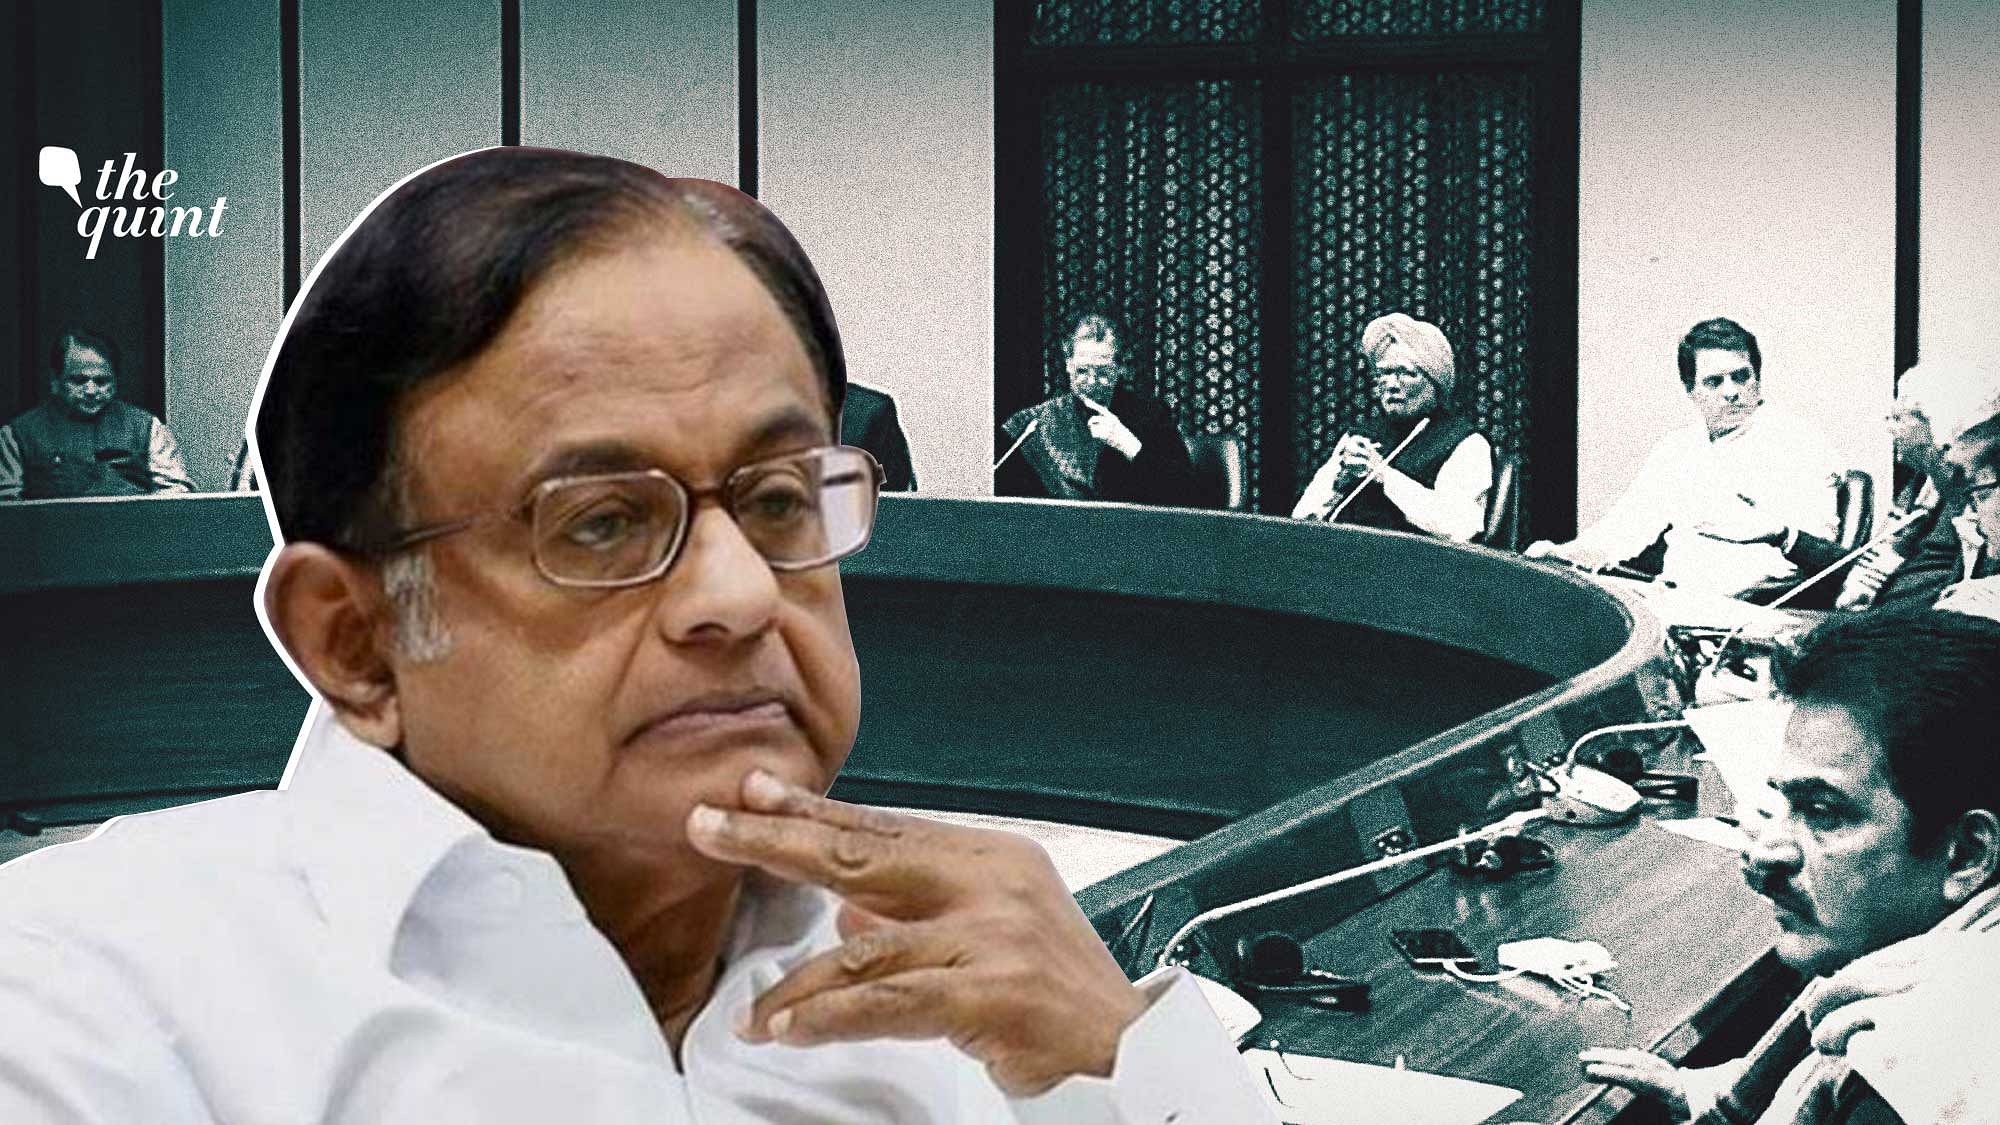 P Chidambaram said it was ‘disappointing’ that parties like TMC, BSP, SP and DMK did not attend the anti-CAA meet.